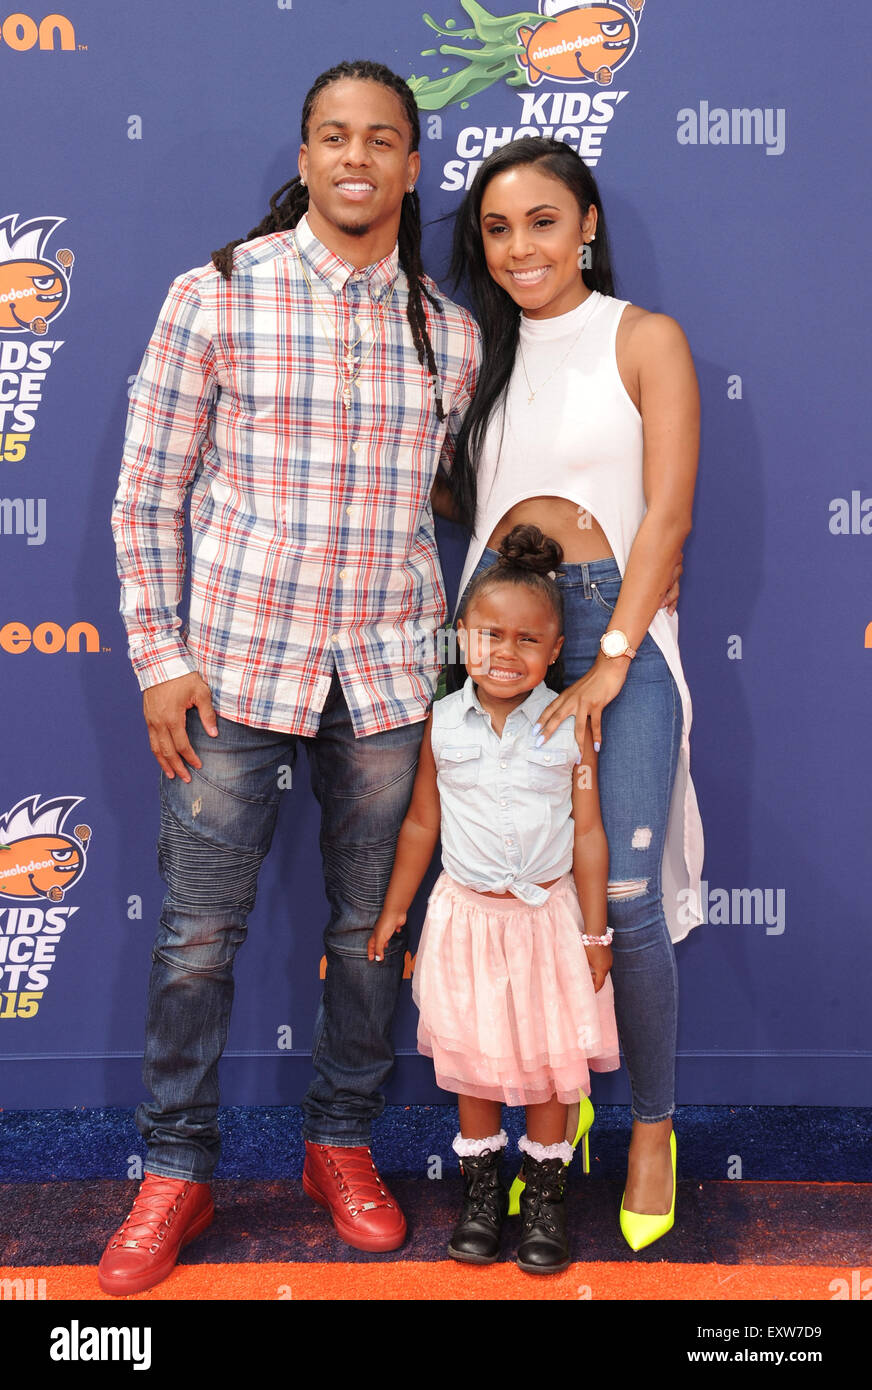 Los Angeles, California, USA. 16th July, 2015. Jason Verrett attending the Nickelodeon Kids Choice Sports Awards 2015 Red Carpet held at the UCLA's Pauley Pavilion in Westwood, California on July 16, 2015. 2015 Credit:  D. Long/Globe Photos/ZUMA Wire/Alamy Live News Stock Photo